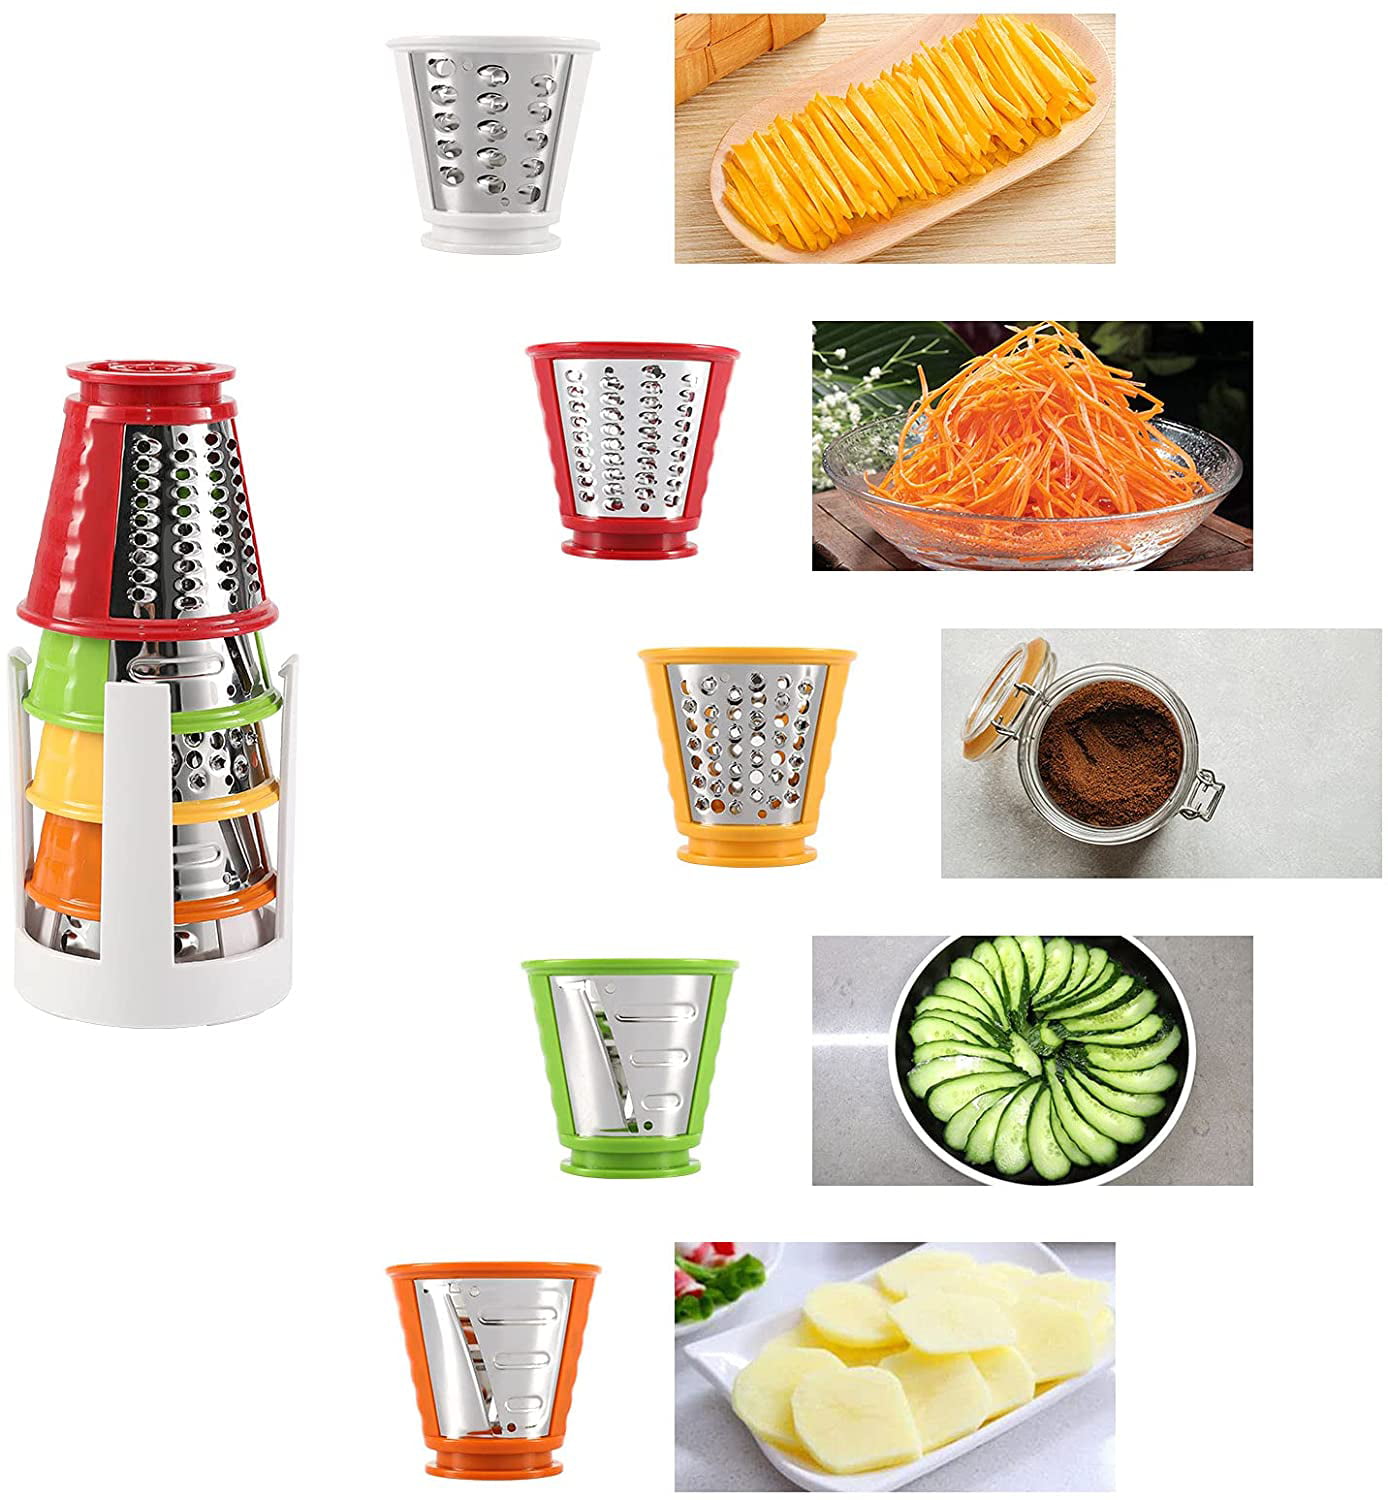 FOHERE Electric Cheese Grater Salad Maker, Electric Slicer Shredder for Home Kitchen Use, One-Touch Easy Control, Electric Grater for Vegetables